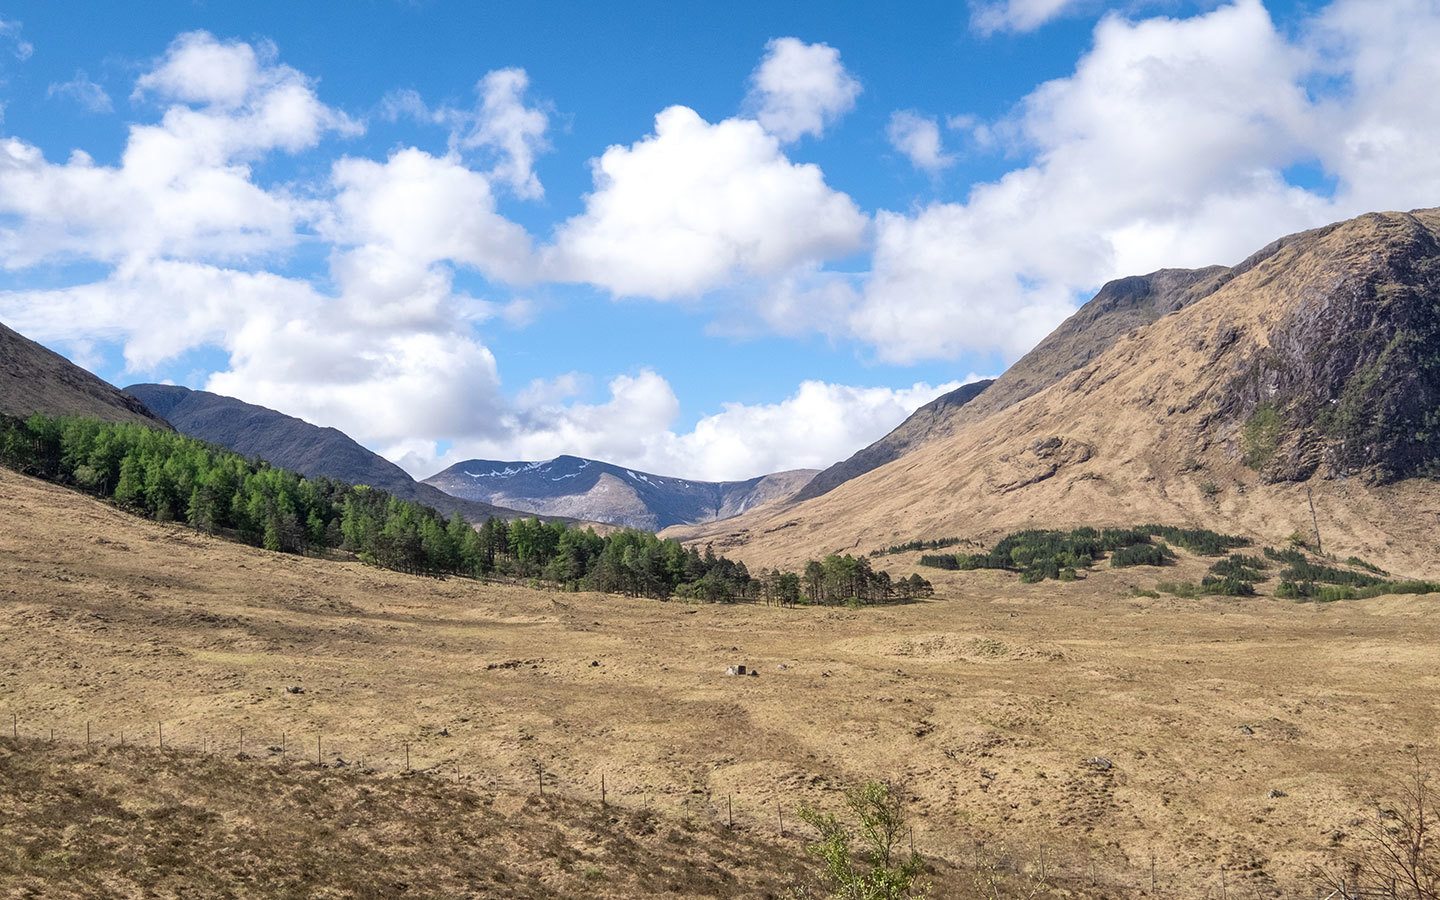 Views along the Glen Etive road in the Scottish Highlands